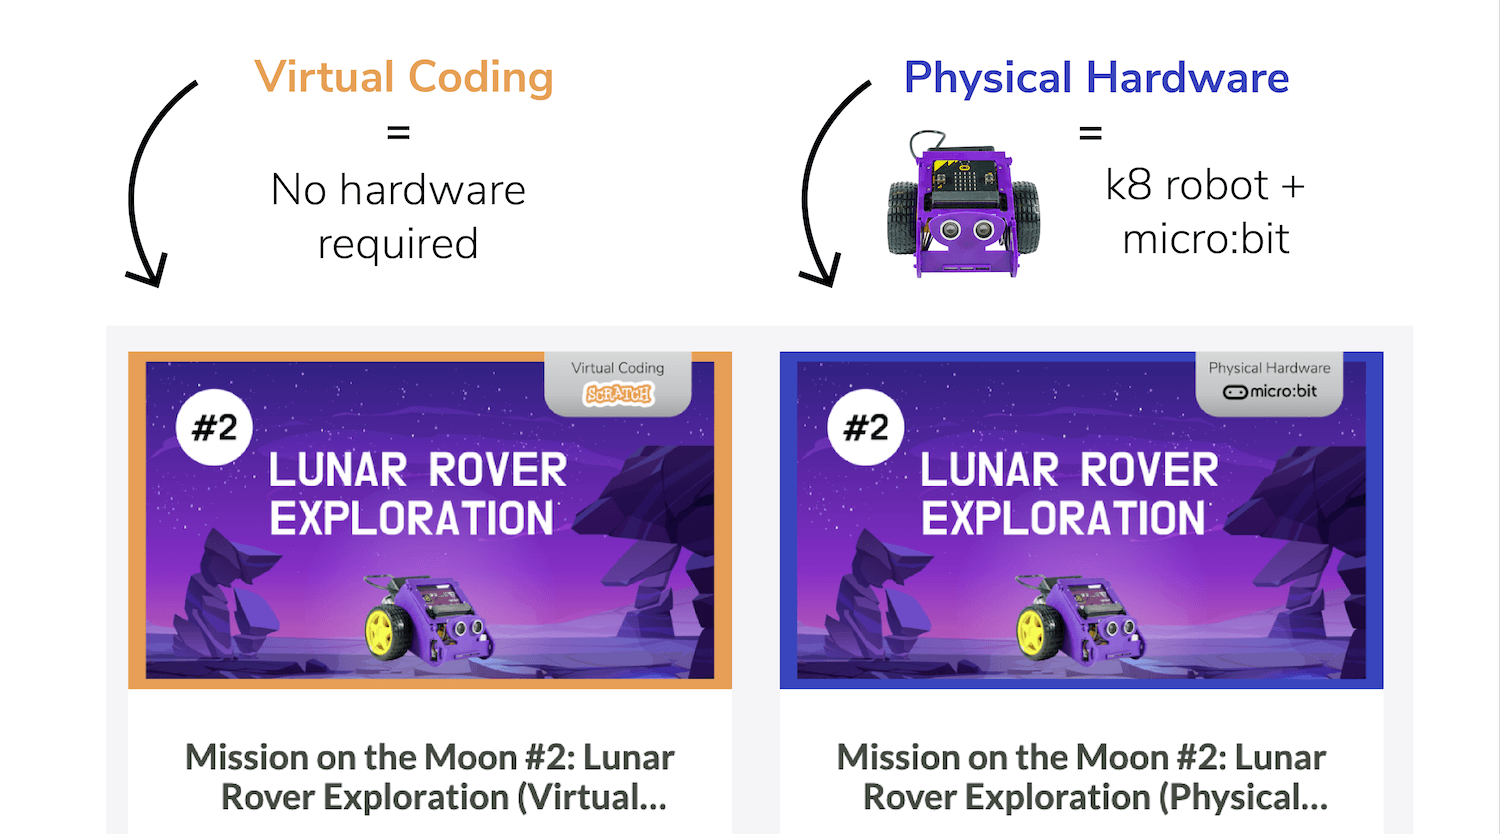 Mission on the Moon course options: Virtual Coding using Scratch or Physical Hardware using k8 robot and micro:bit